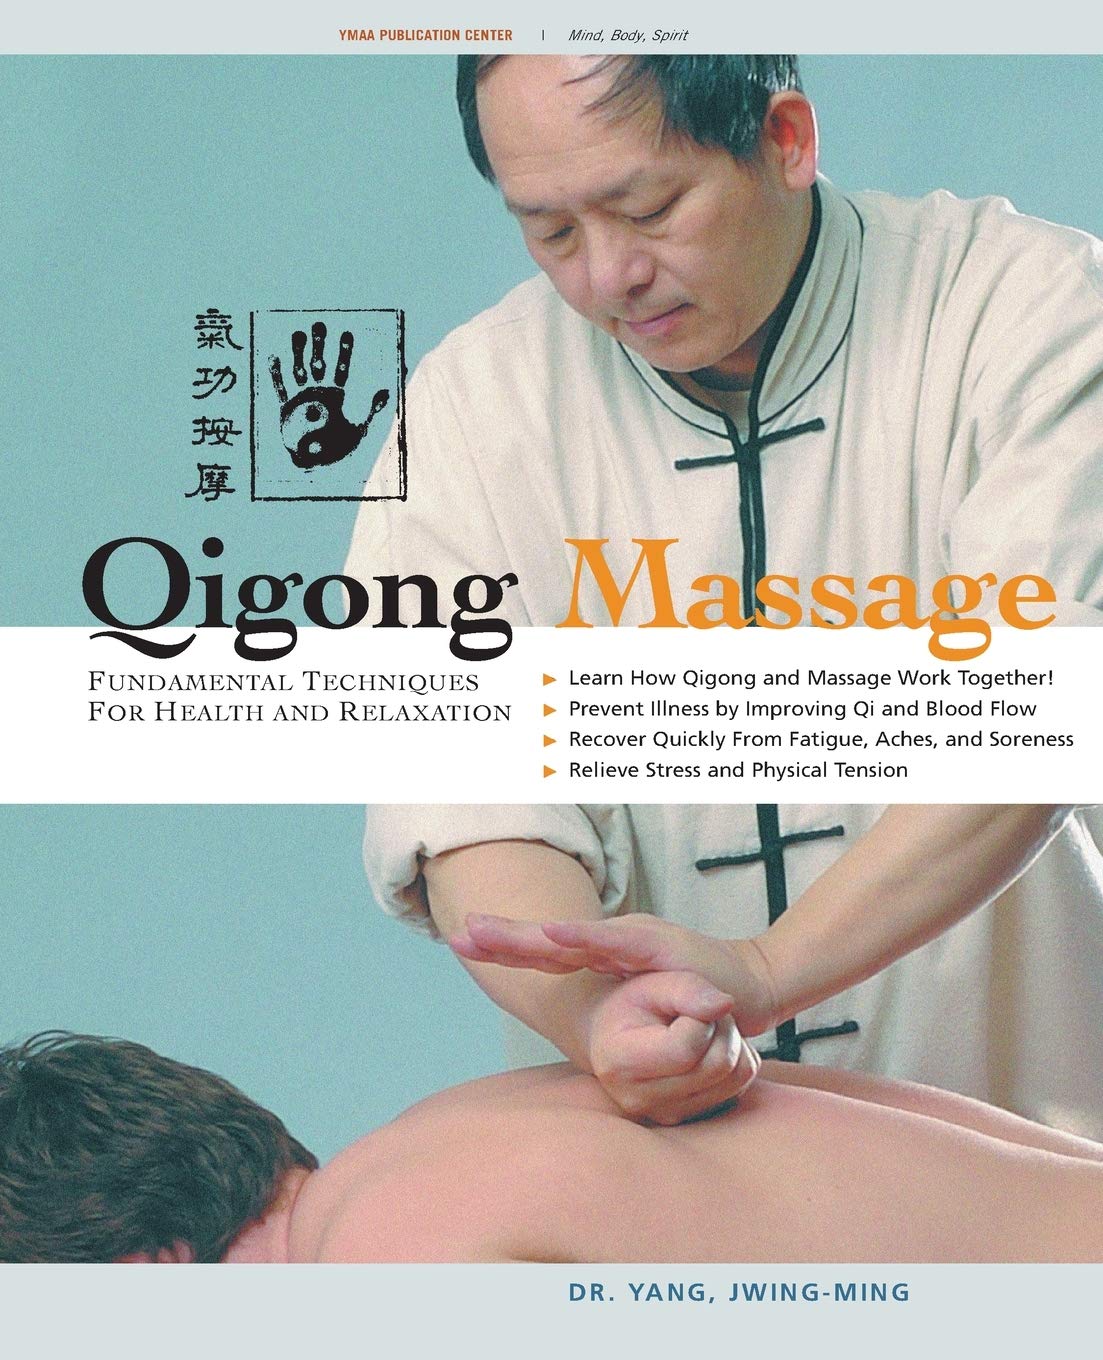 Qigong Massage: Fundamental Techniques for Health and Relaxation Book by Dr Yang, Jwing-Ming - Budovideos Inc